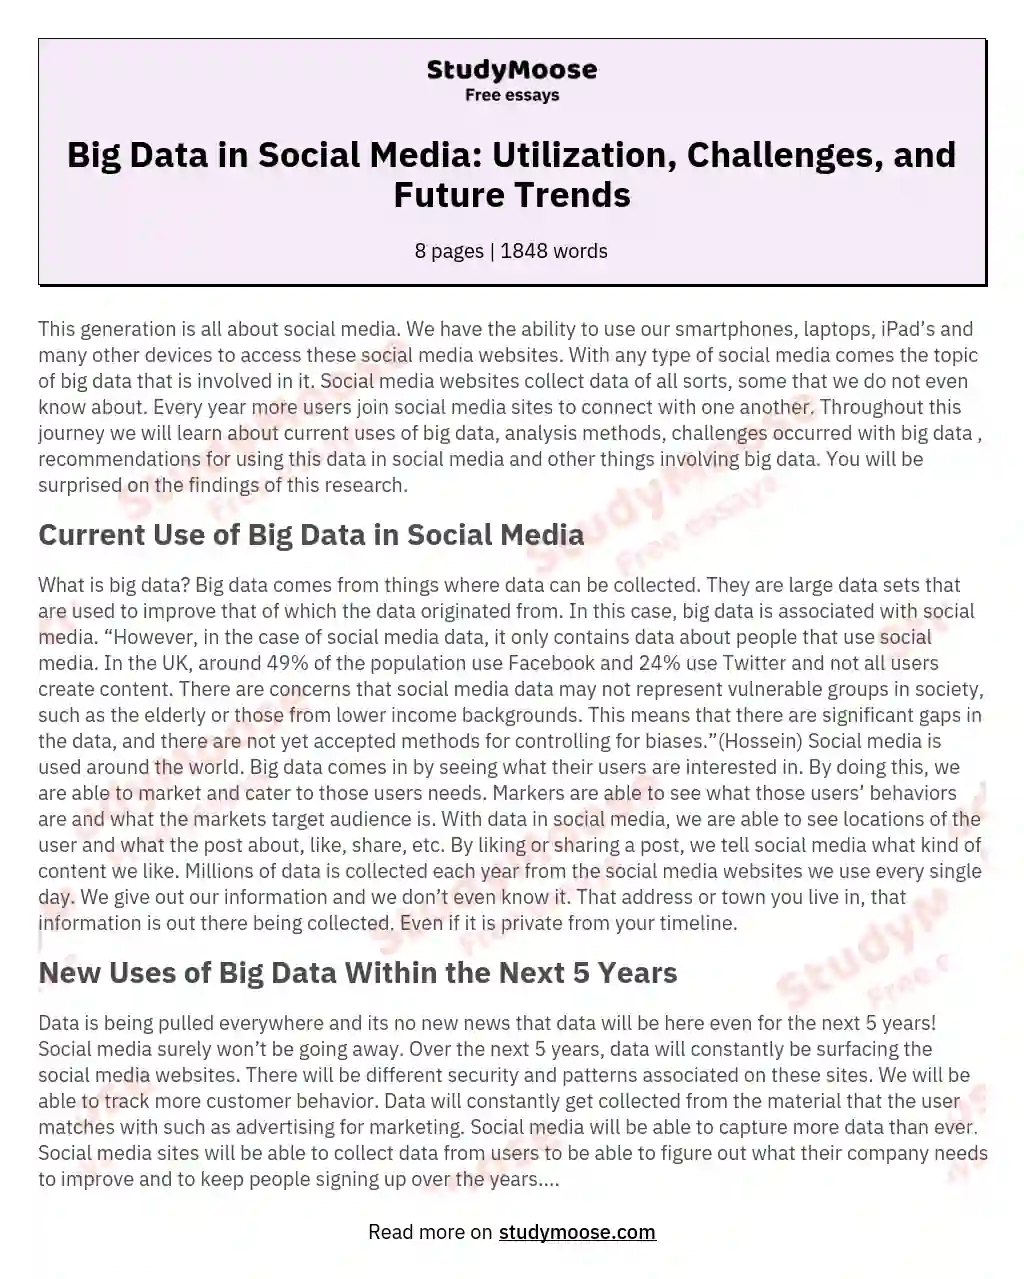 Big Data in Social Media: Utilization, Challenges, and Future Trends essay